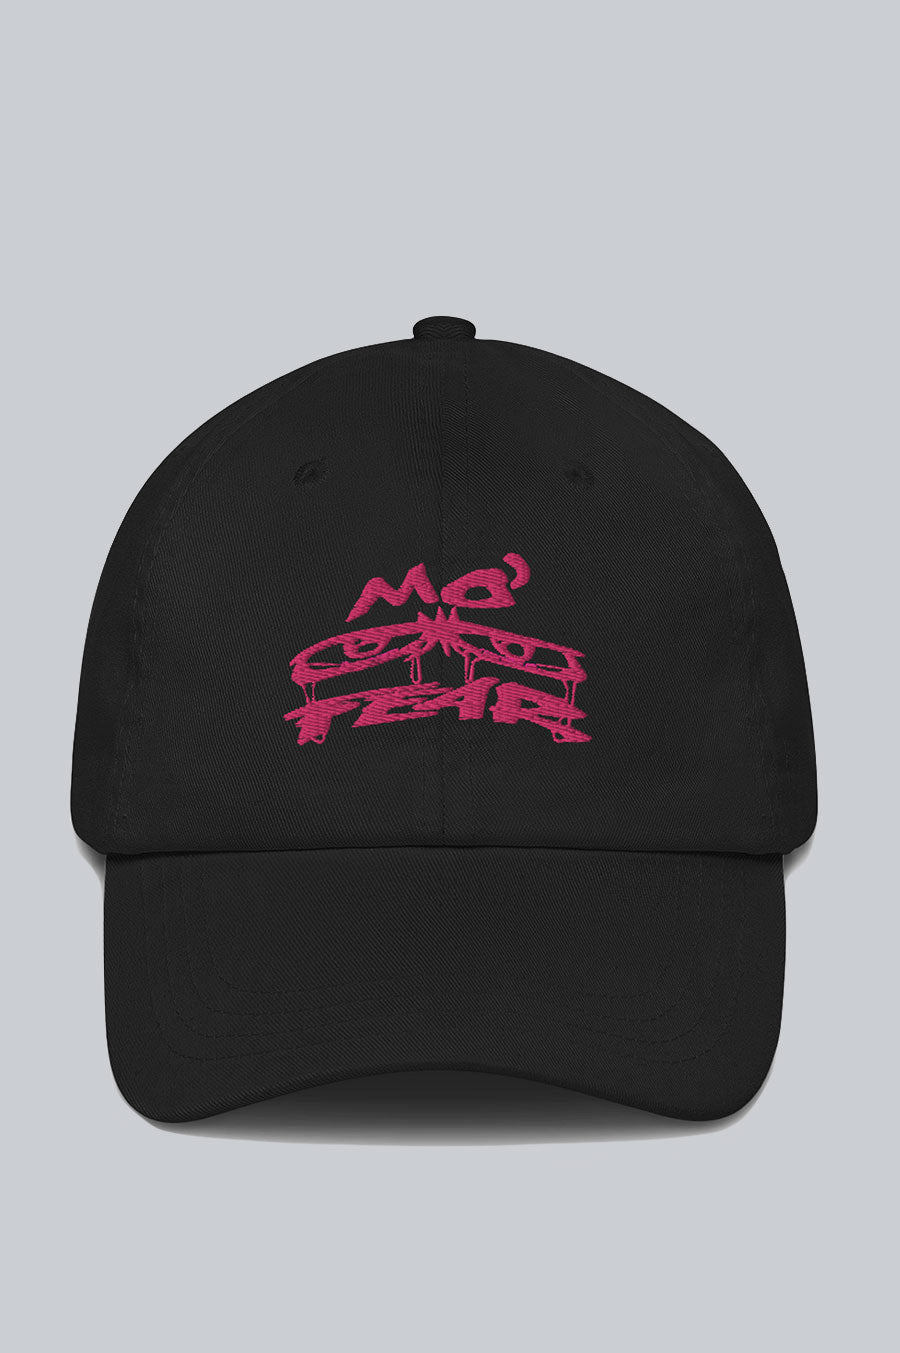 DTF.NYC MO' FEAR 6 PANEL HAT BLACK